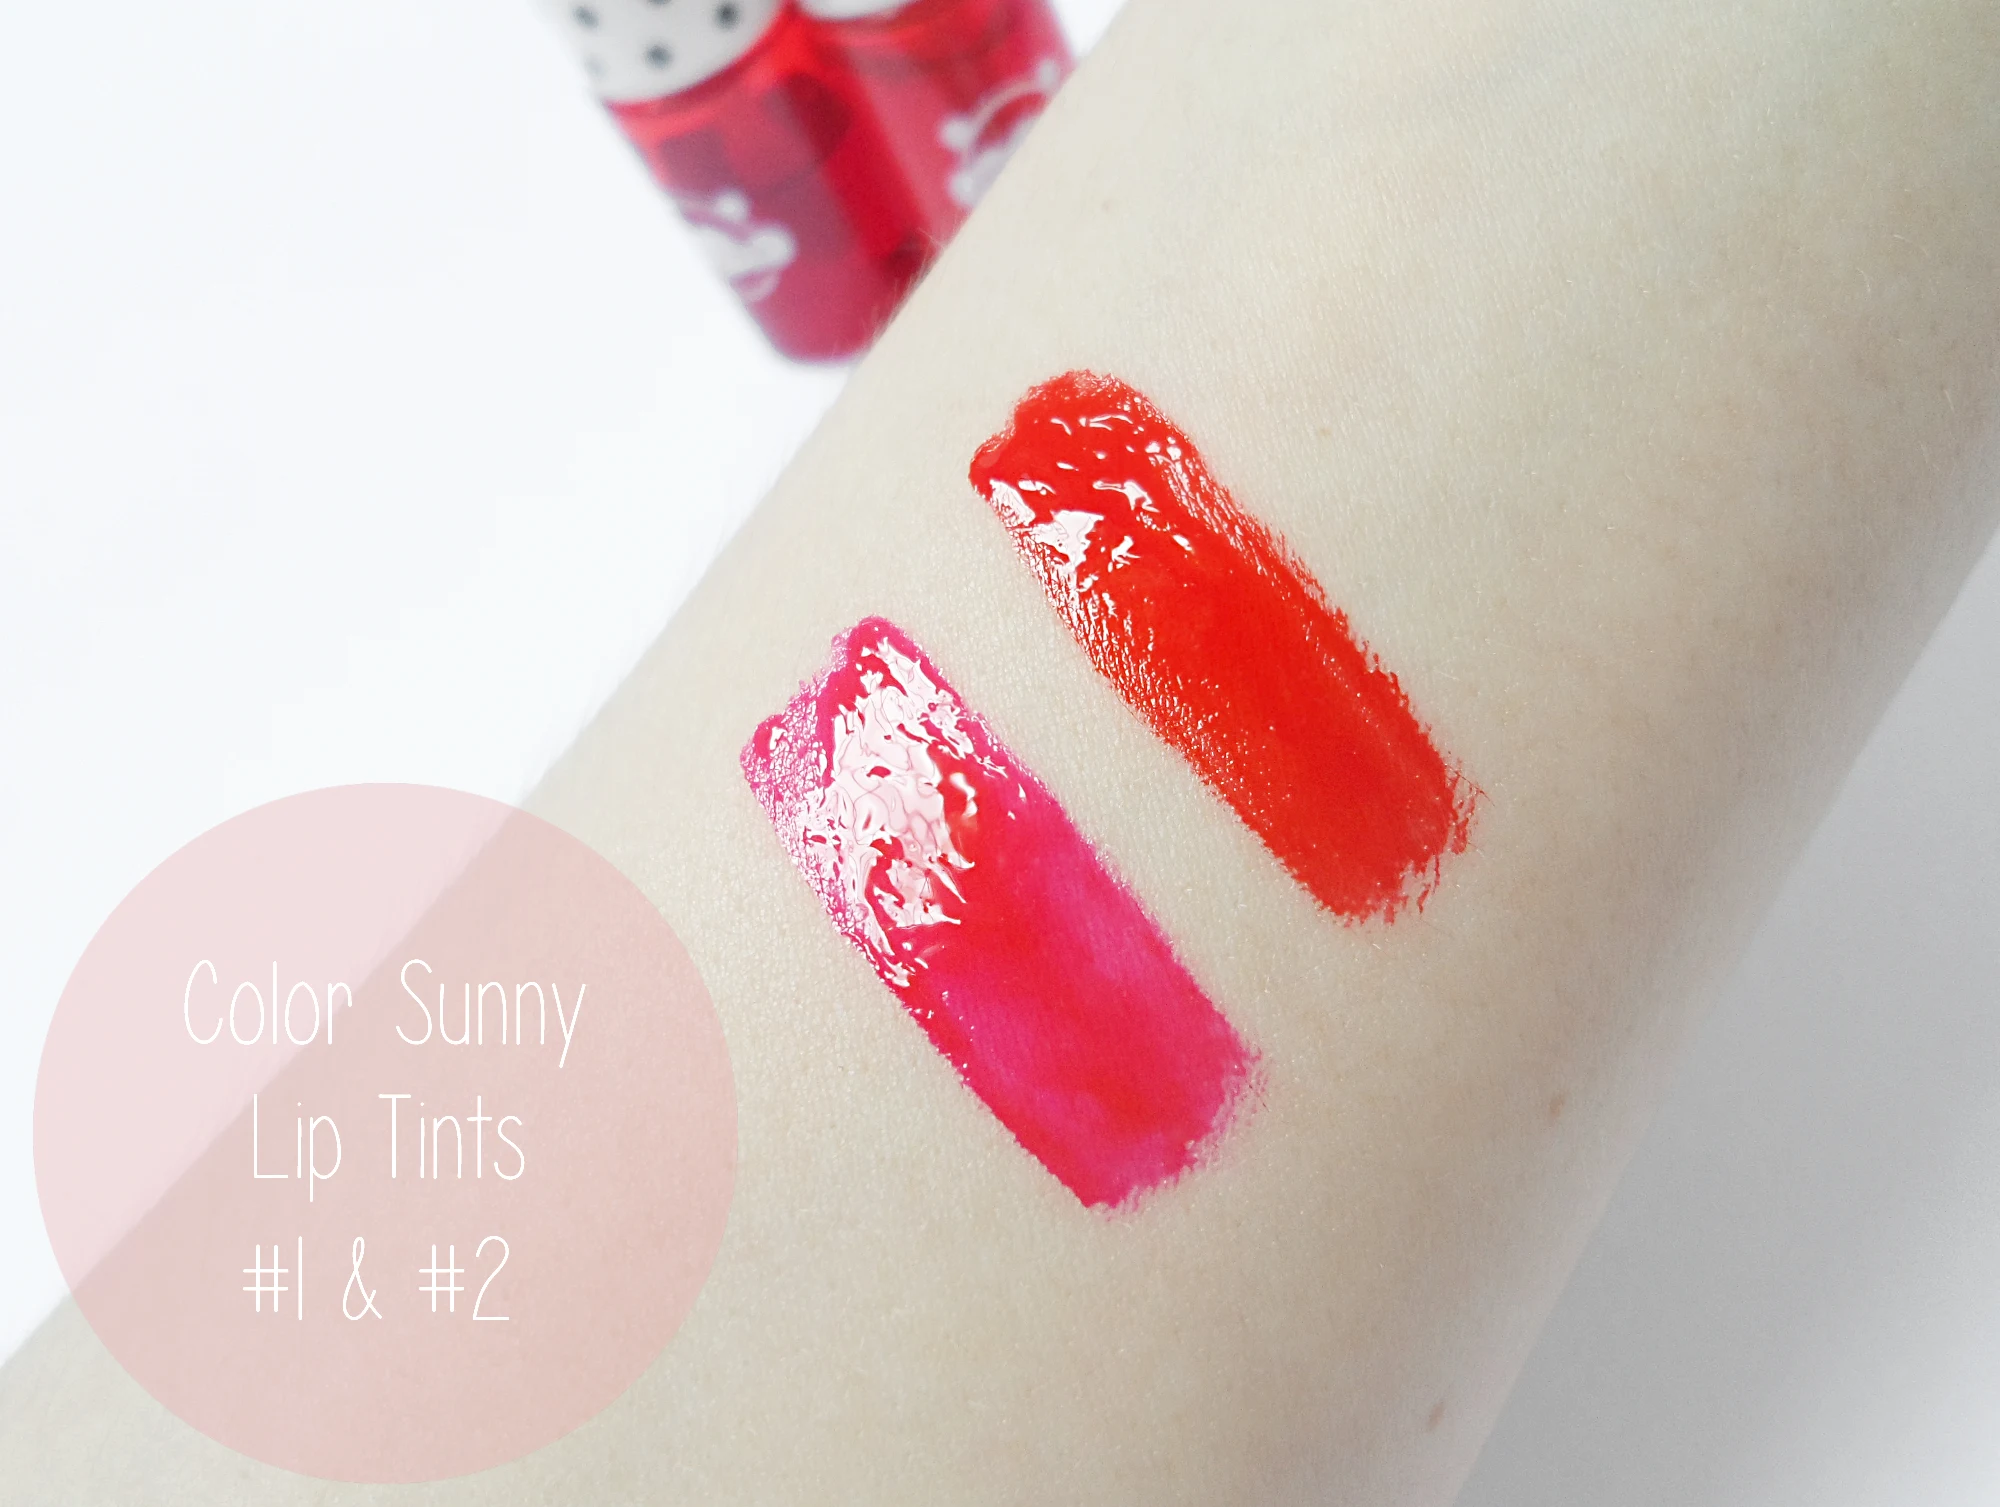 peel-off lip tint , lip gloss by affordable brand color sunny, review with pictures, swatches and before after demonstration by blogger